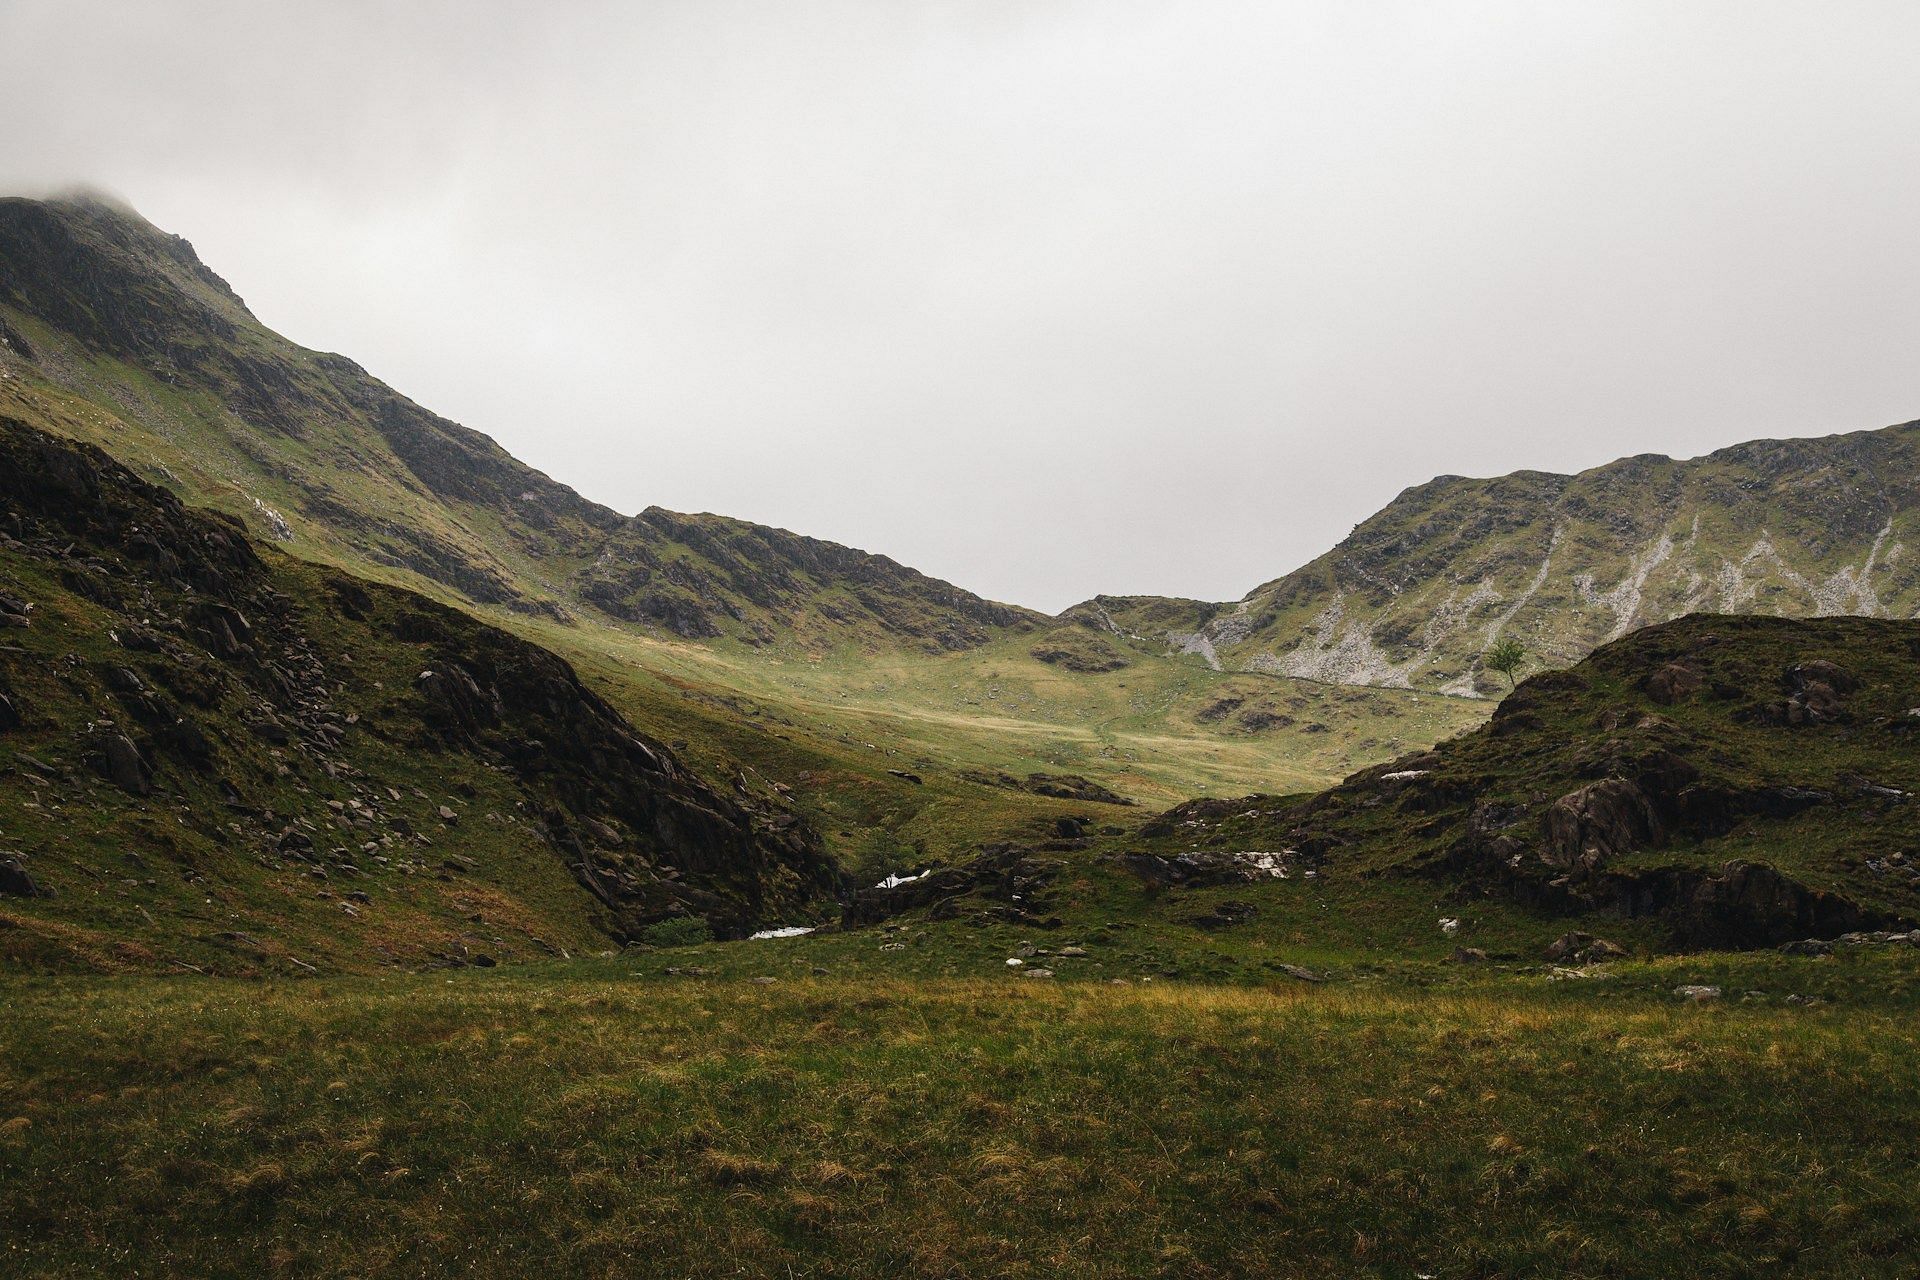 Go to the hills to breathe clean air. (Image by Edan Cohen/Unsplash)